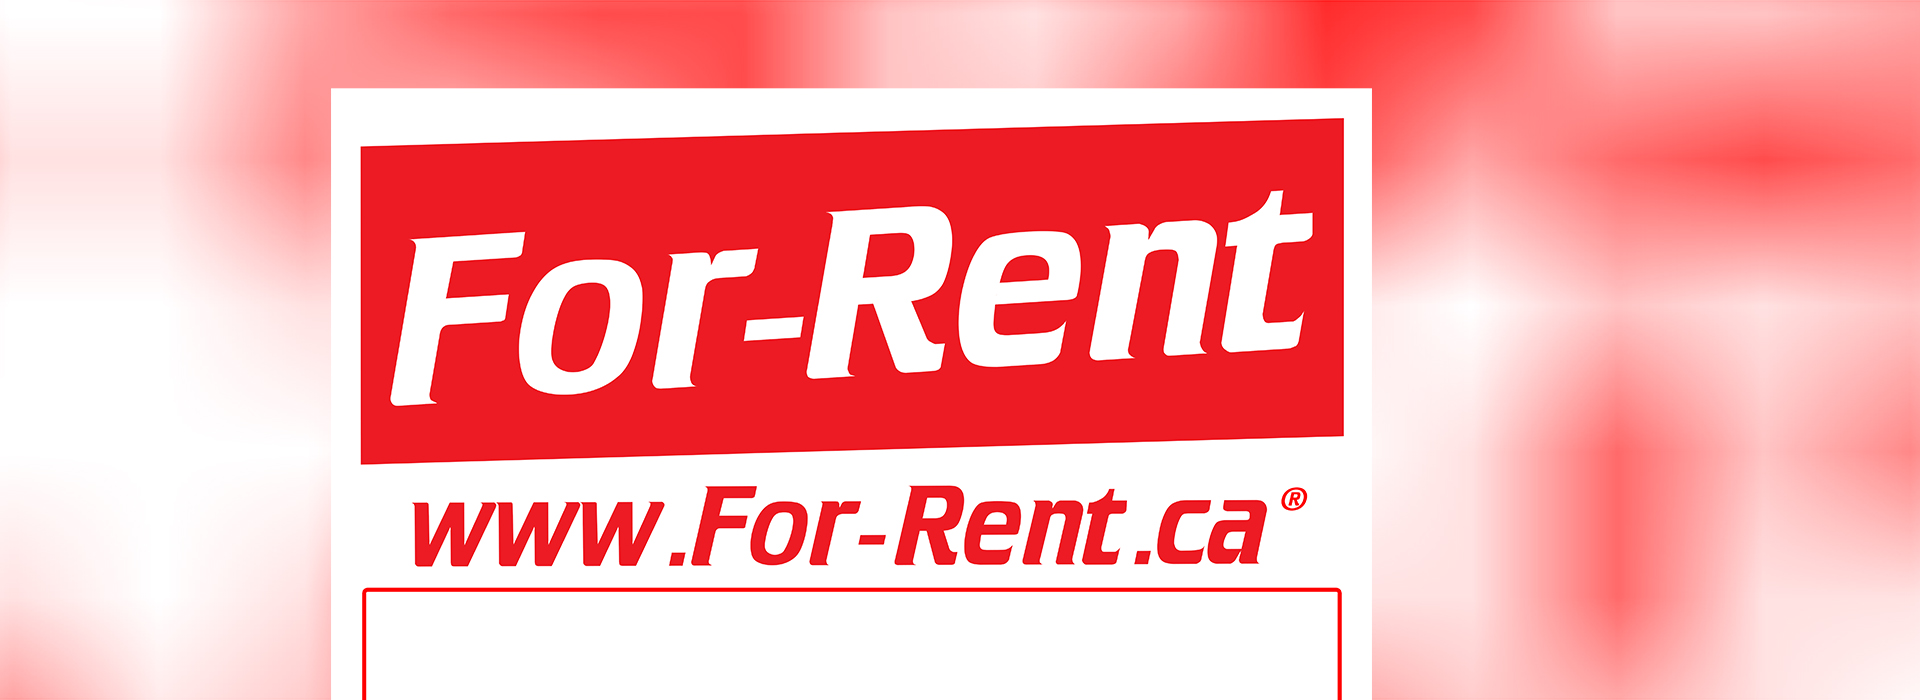 For-Rent.ca